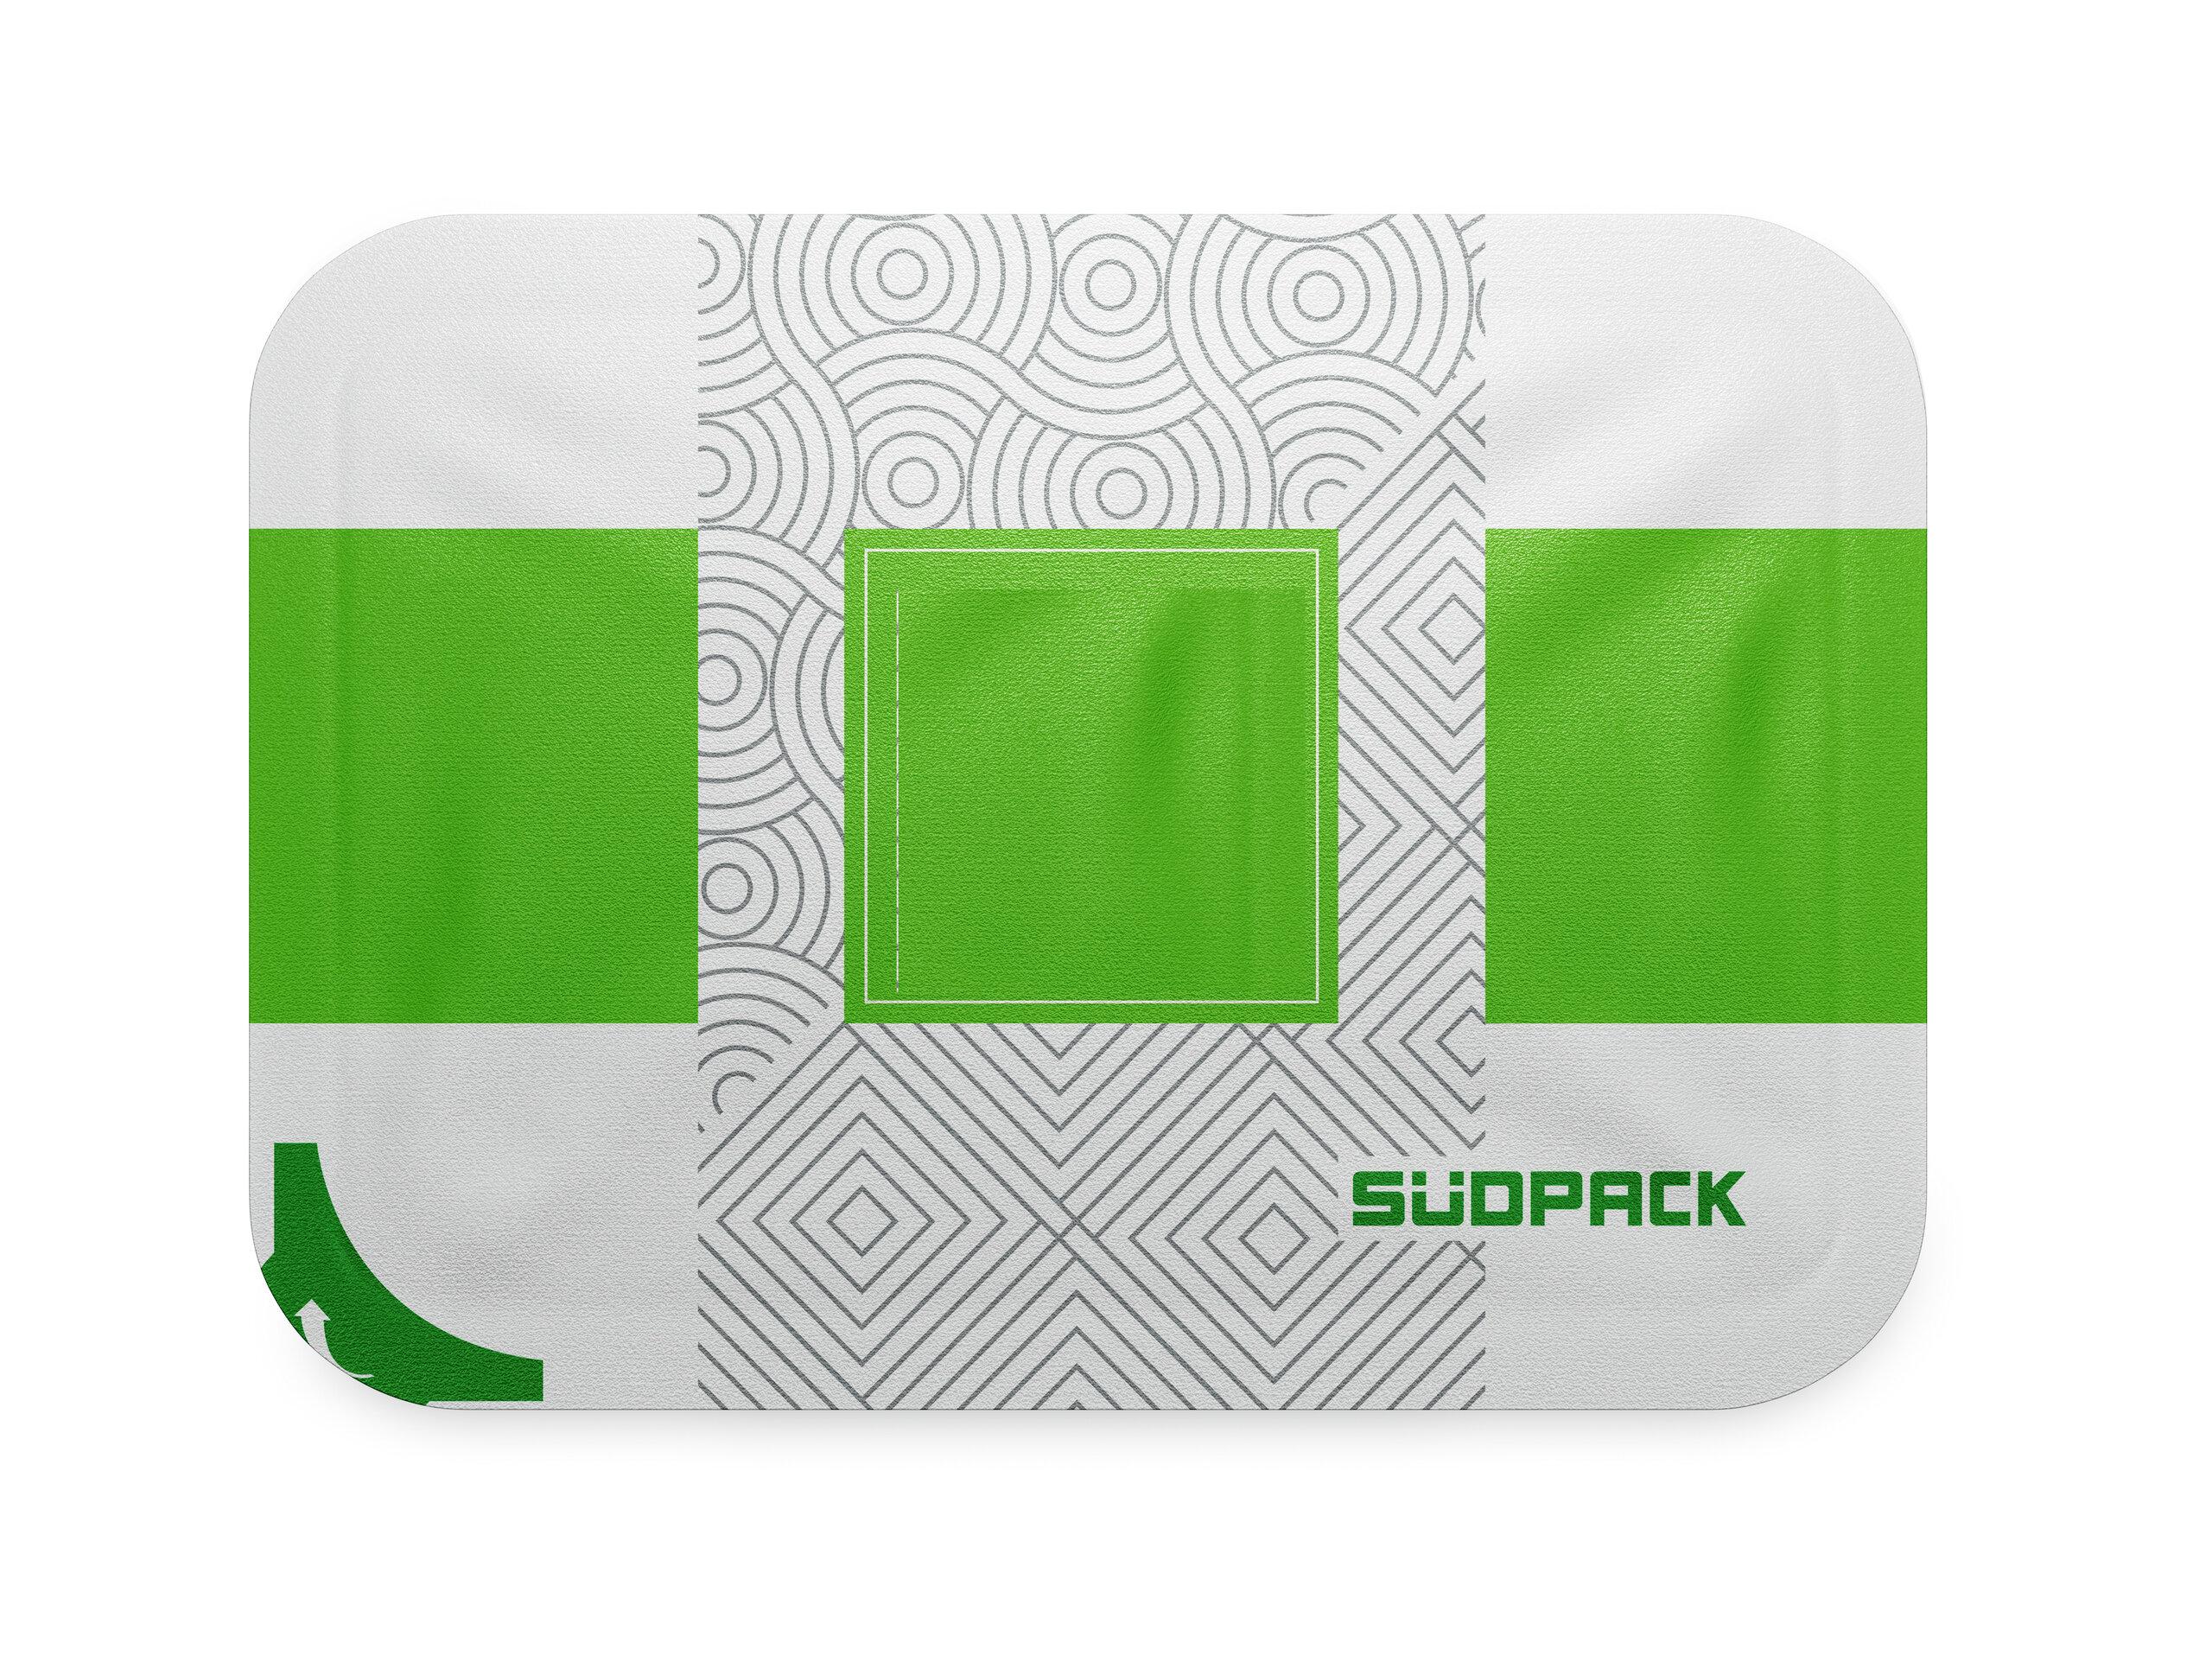 SÜDPACK's Top Film for Efficient, Secure, and Sustainable Packaging Solutions